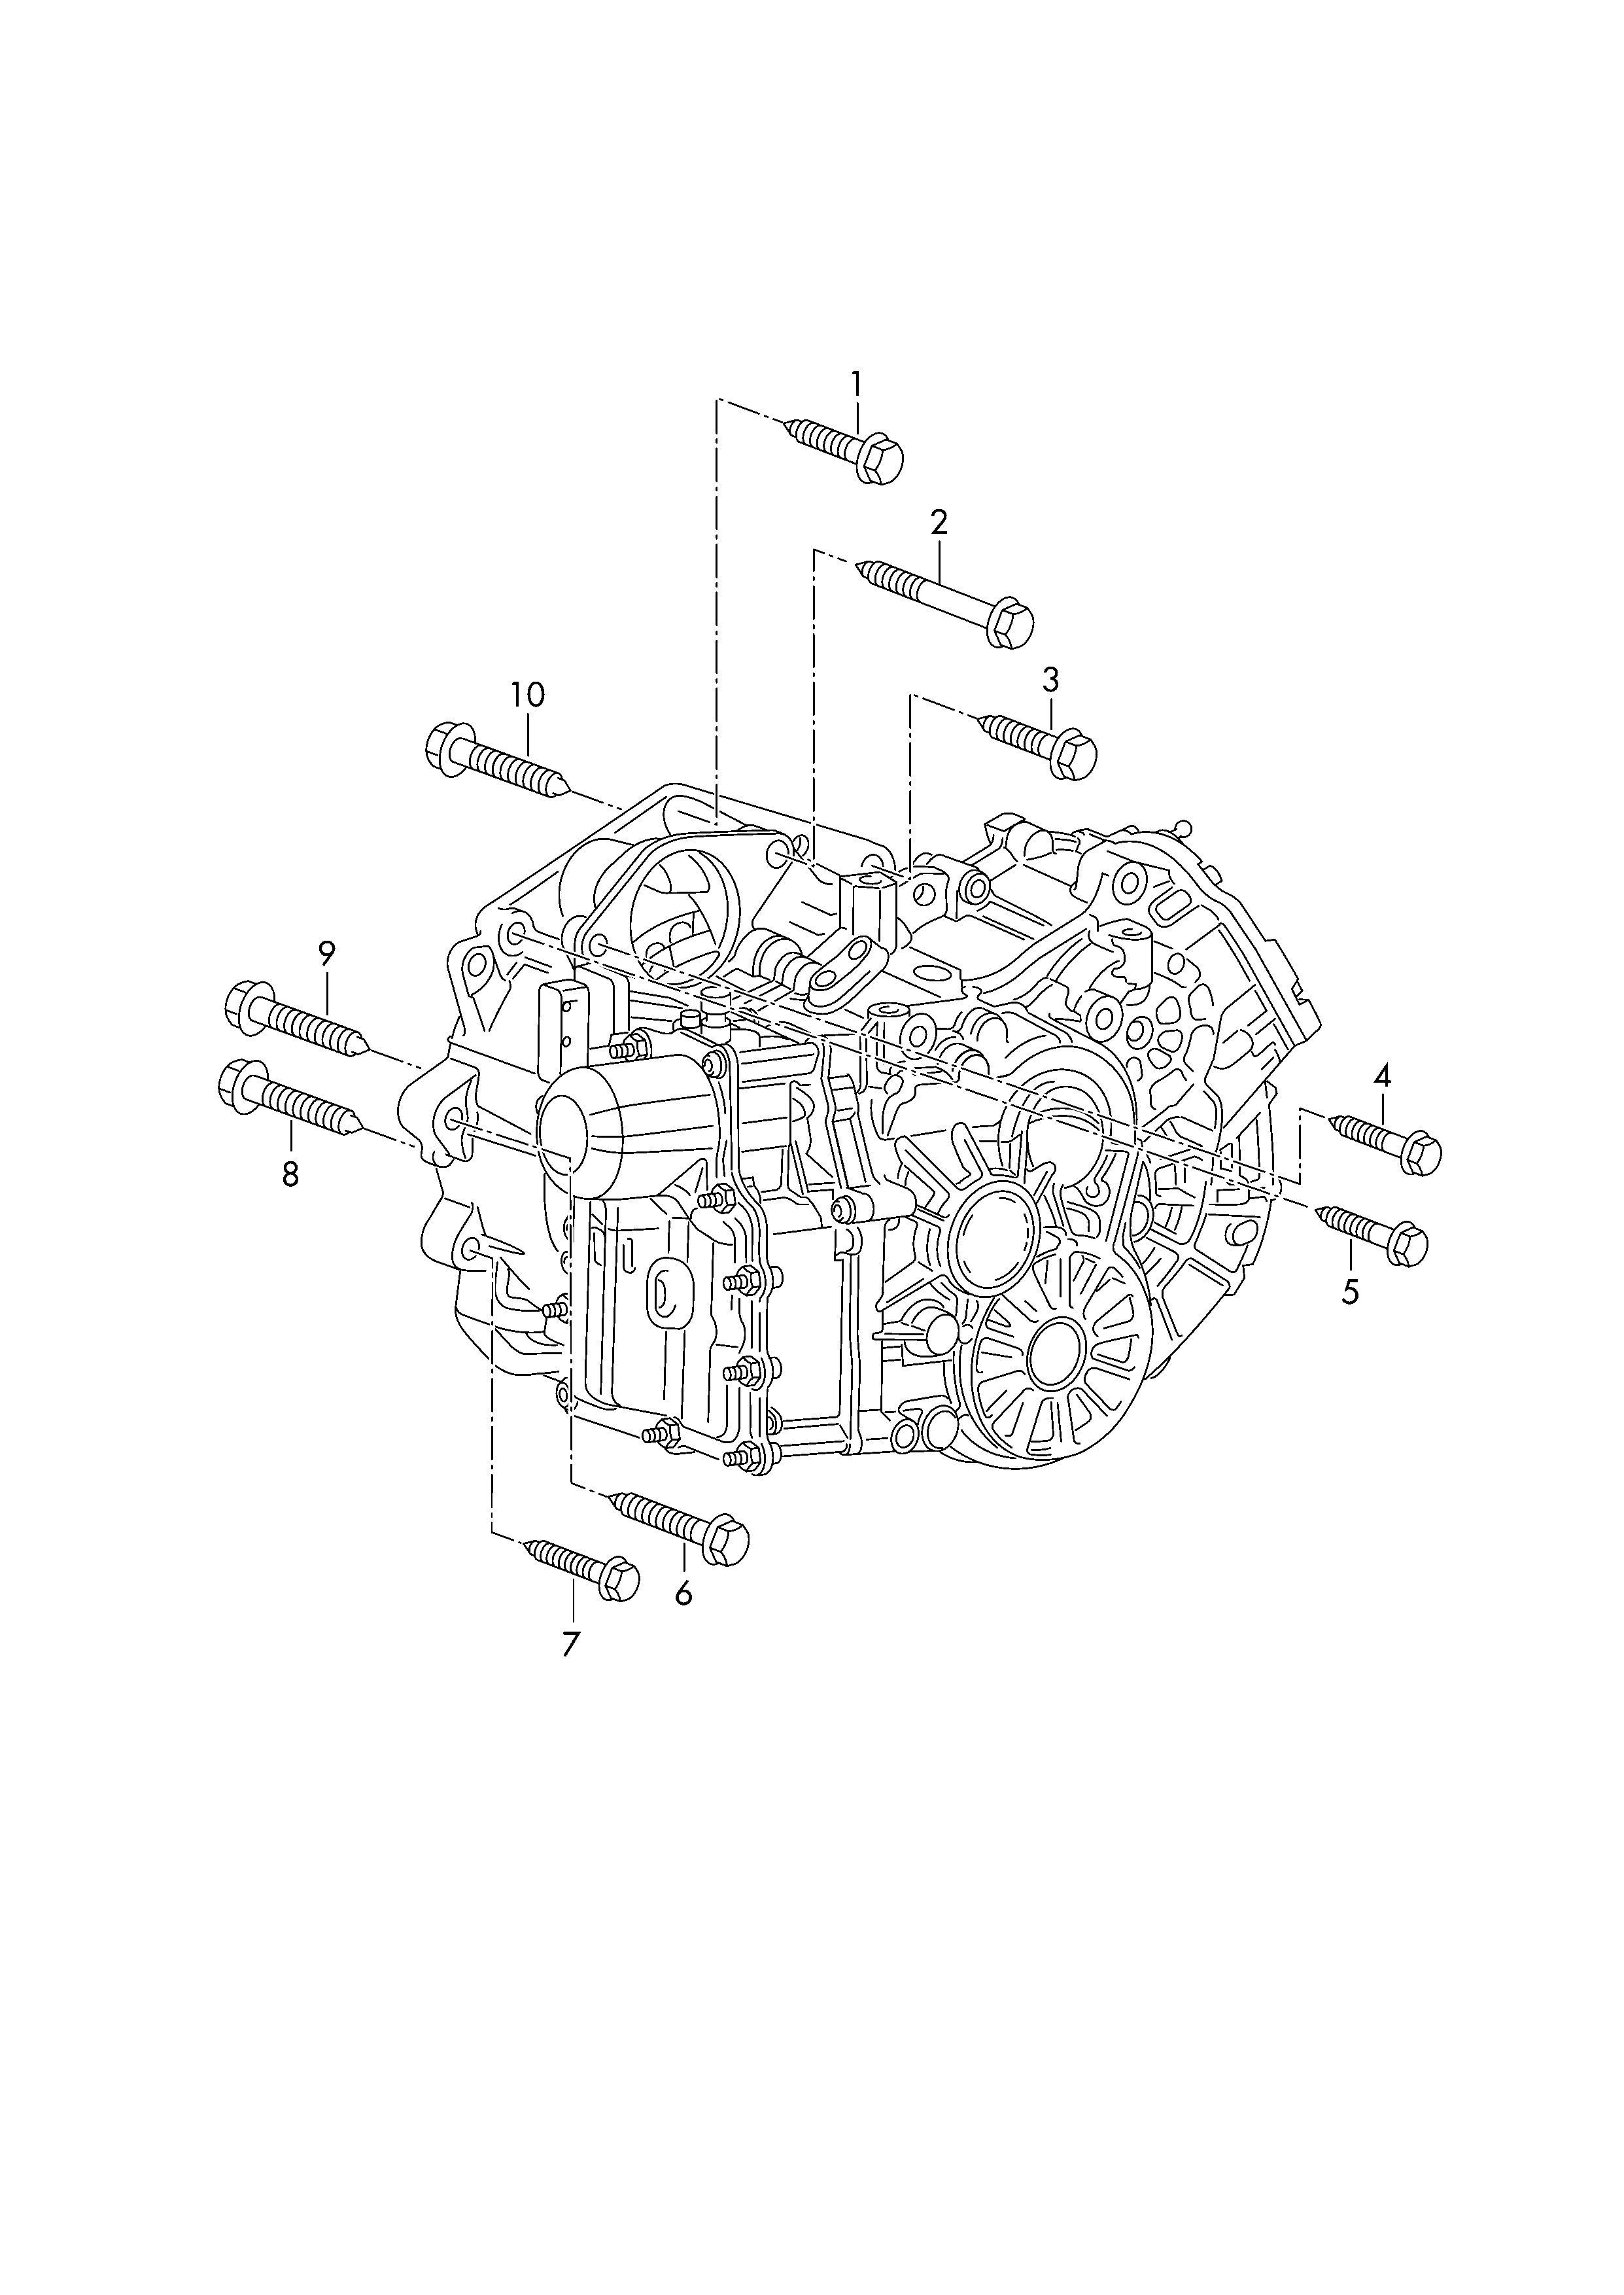 mounting parts for engine and<br>transmissionFor 7-speed dual clutch<br>gearbox DQ200 - Scirocco - sci